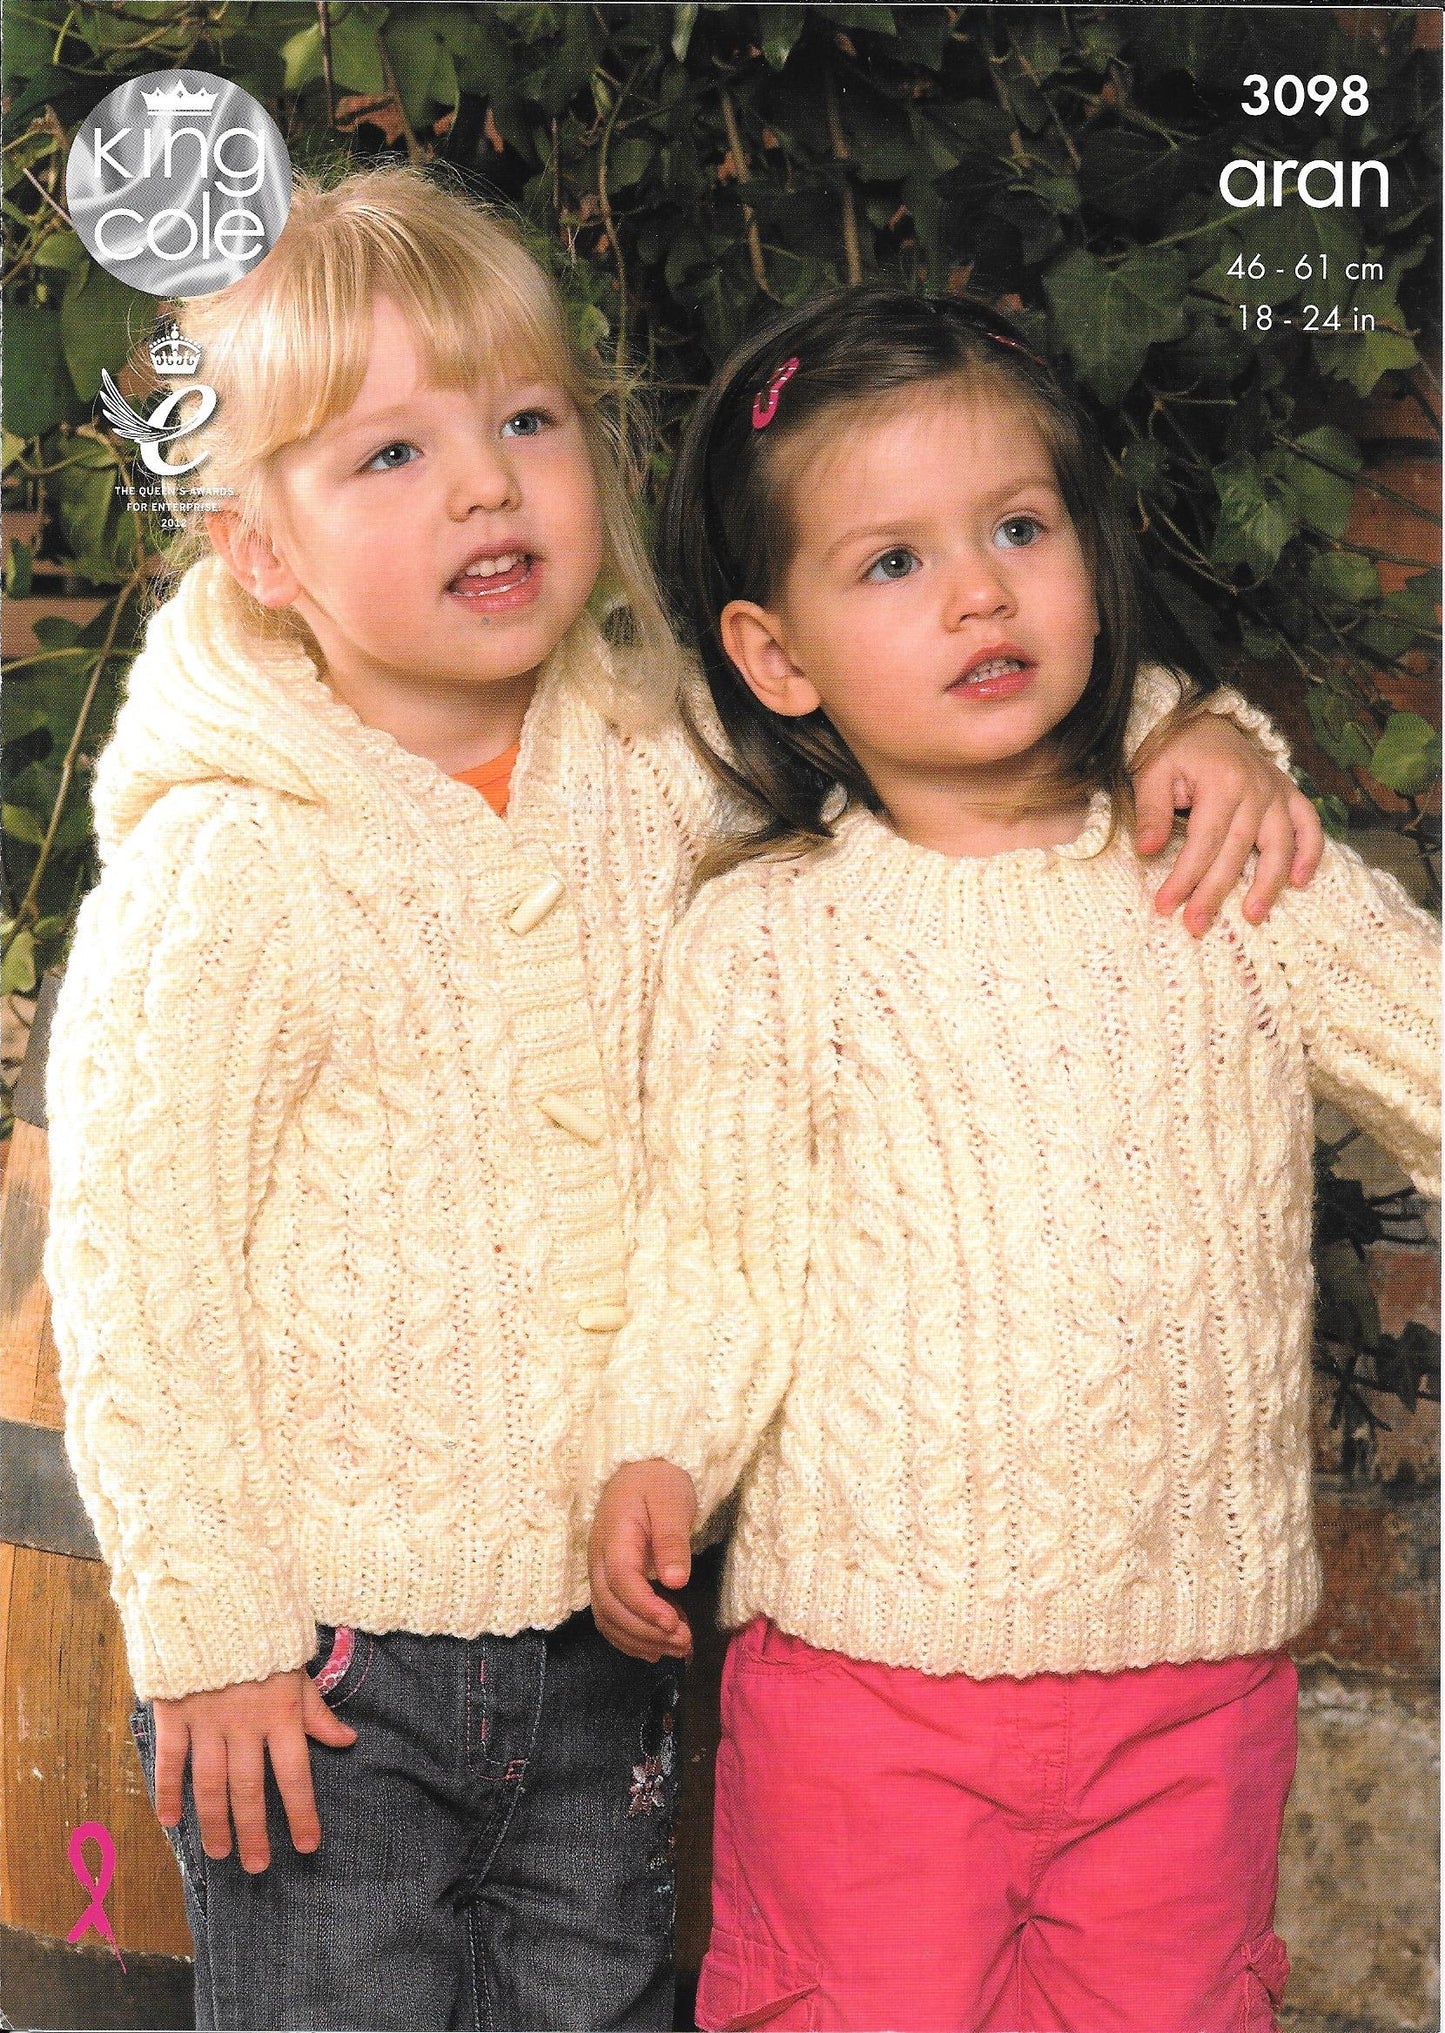 3098 King Cole Aran child hooded jacket, sweater and coat knitting pattern